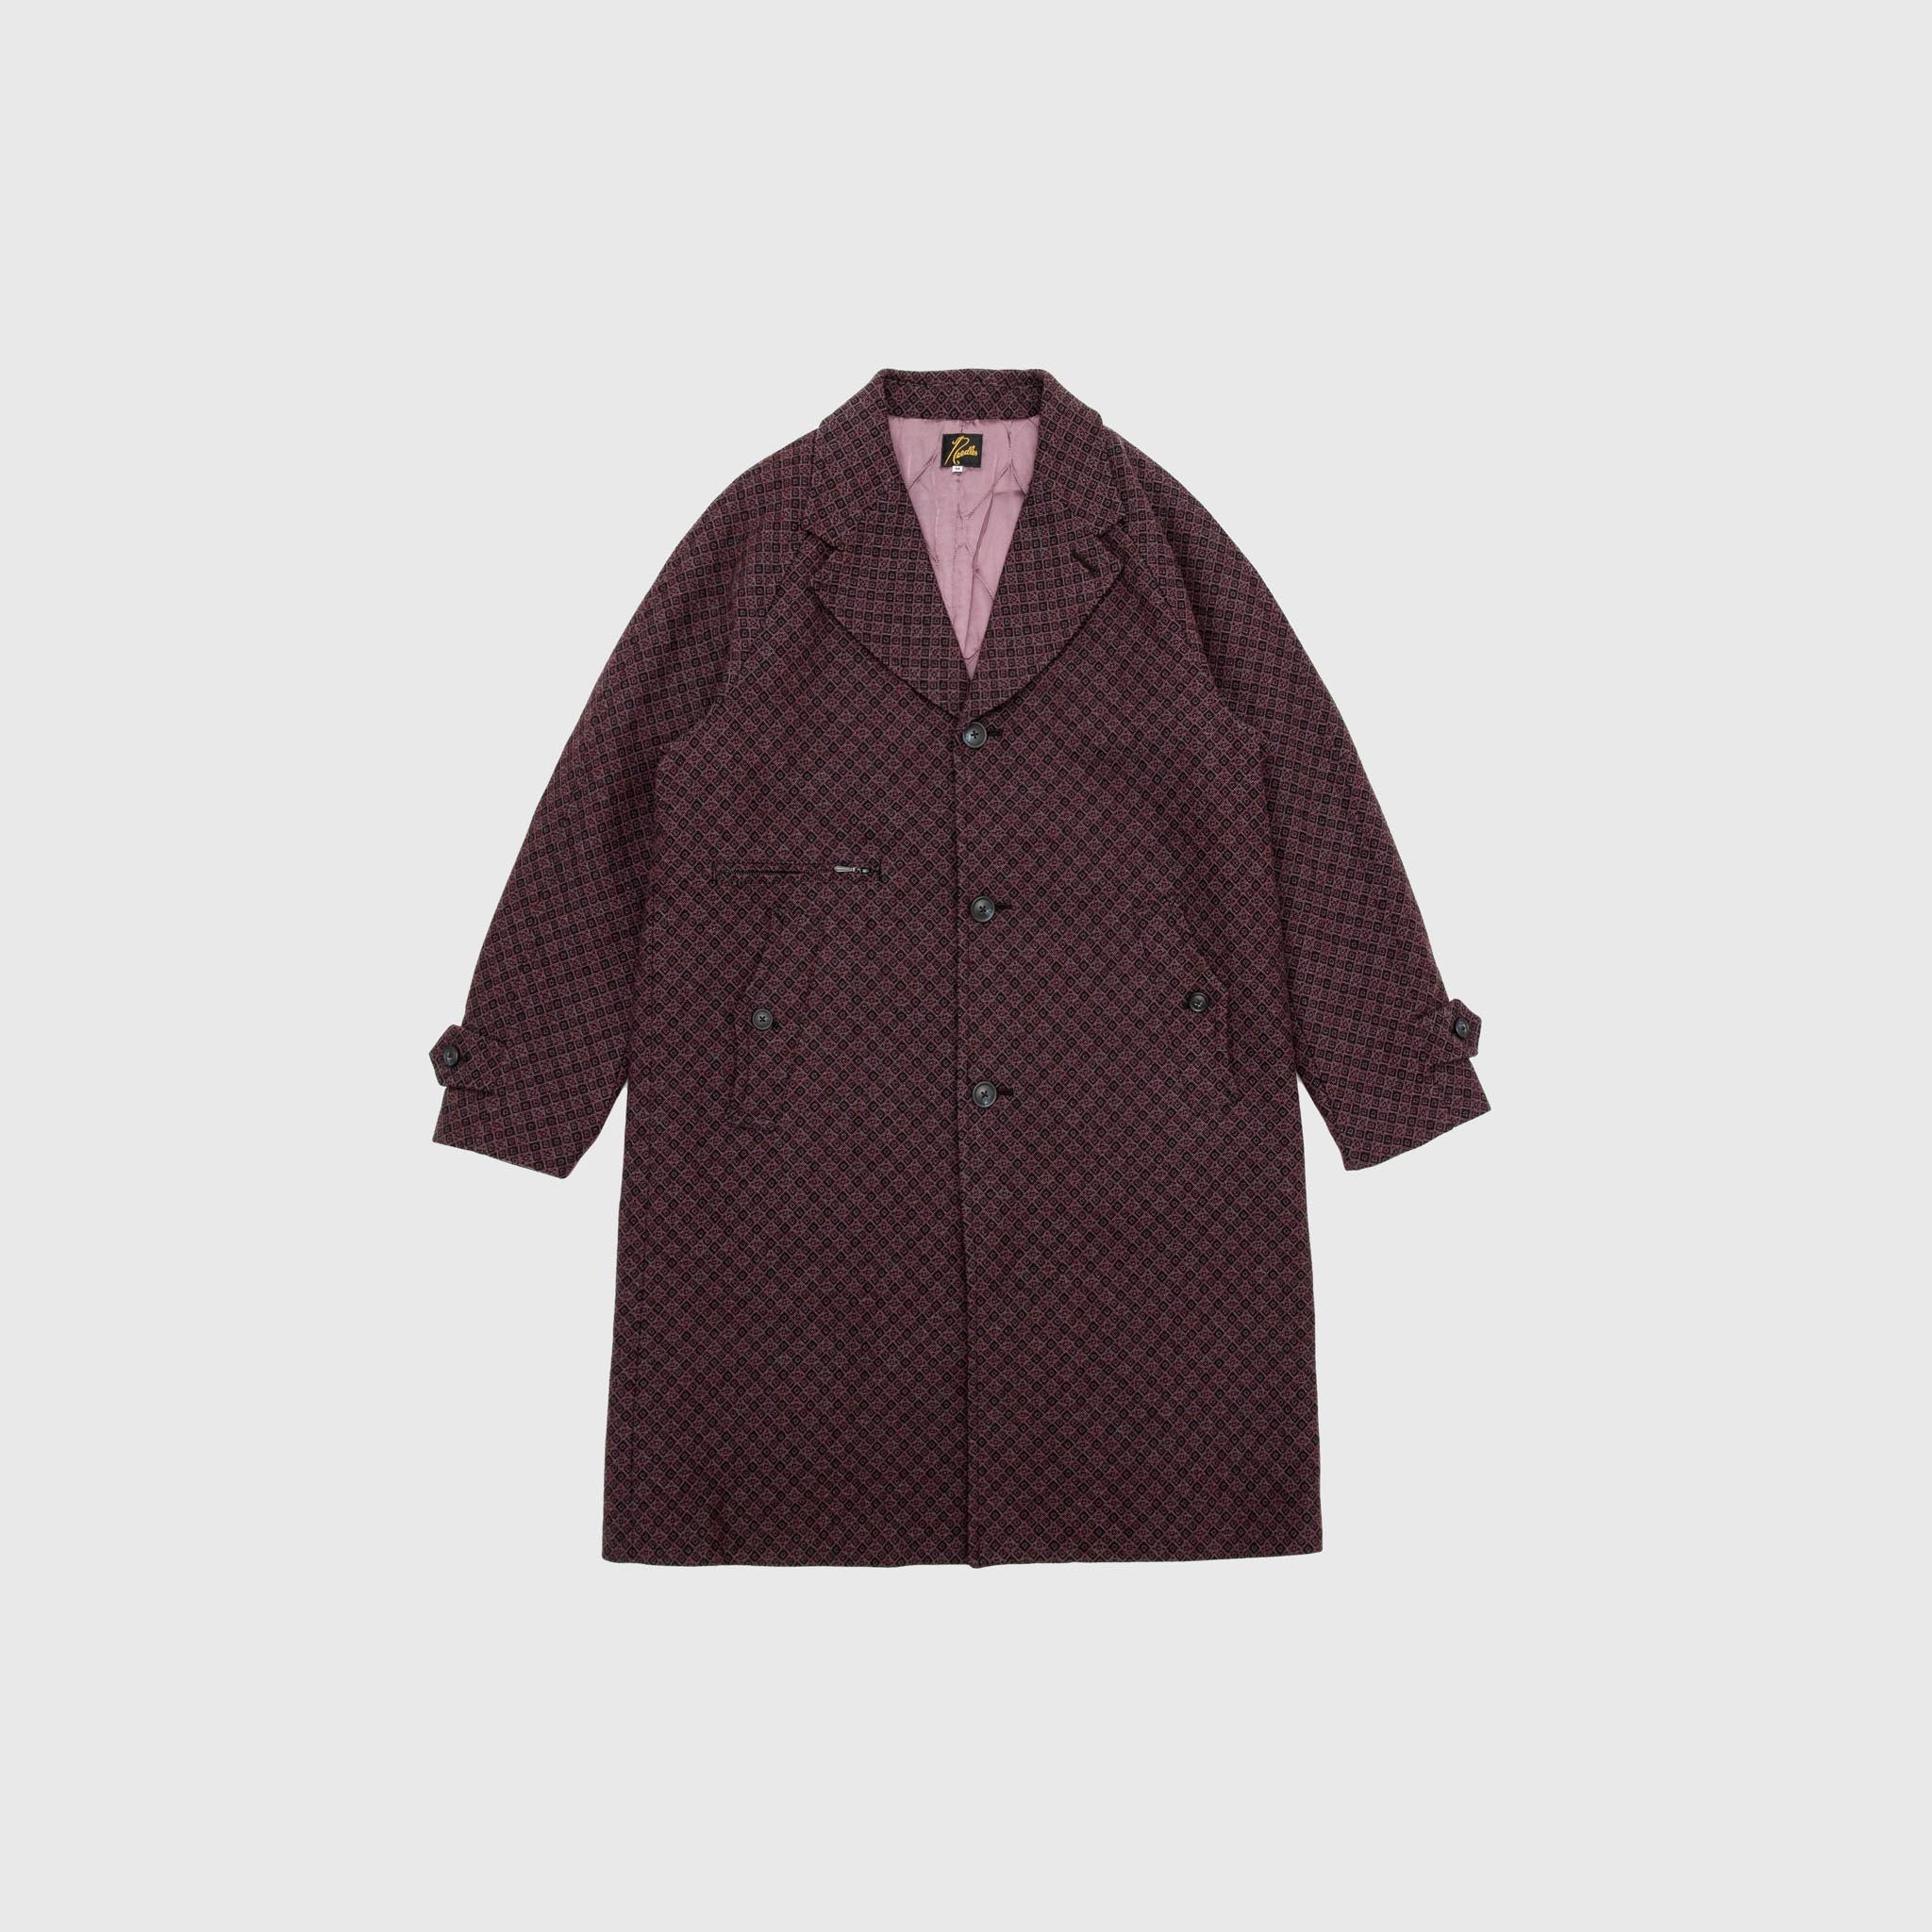 CHESTER COAT – PACKER SHOES